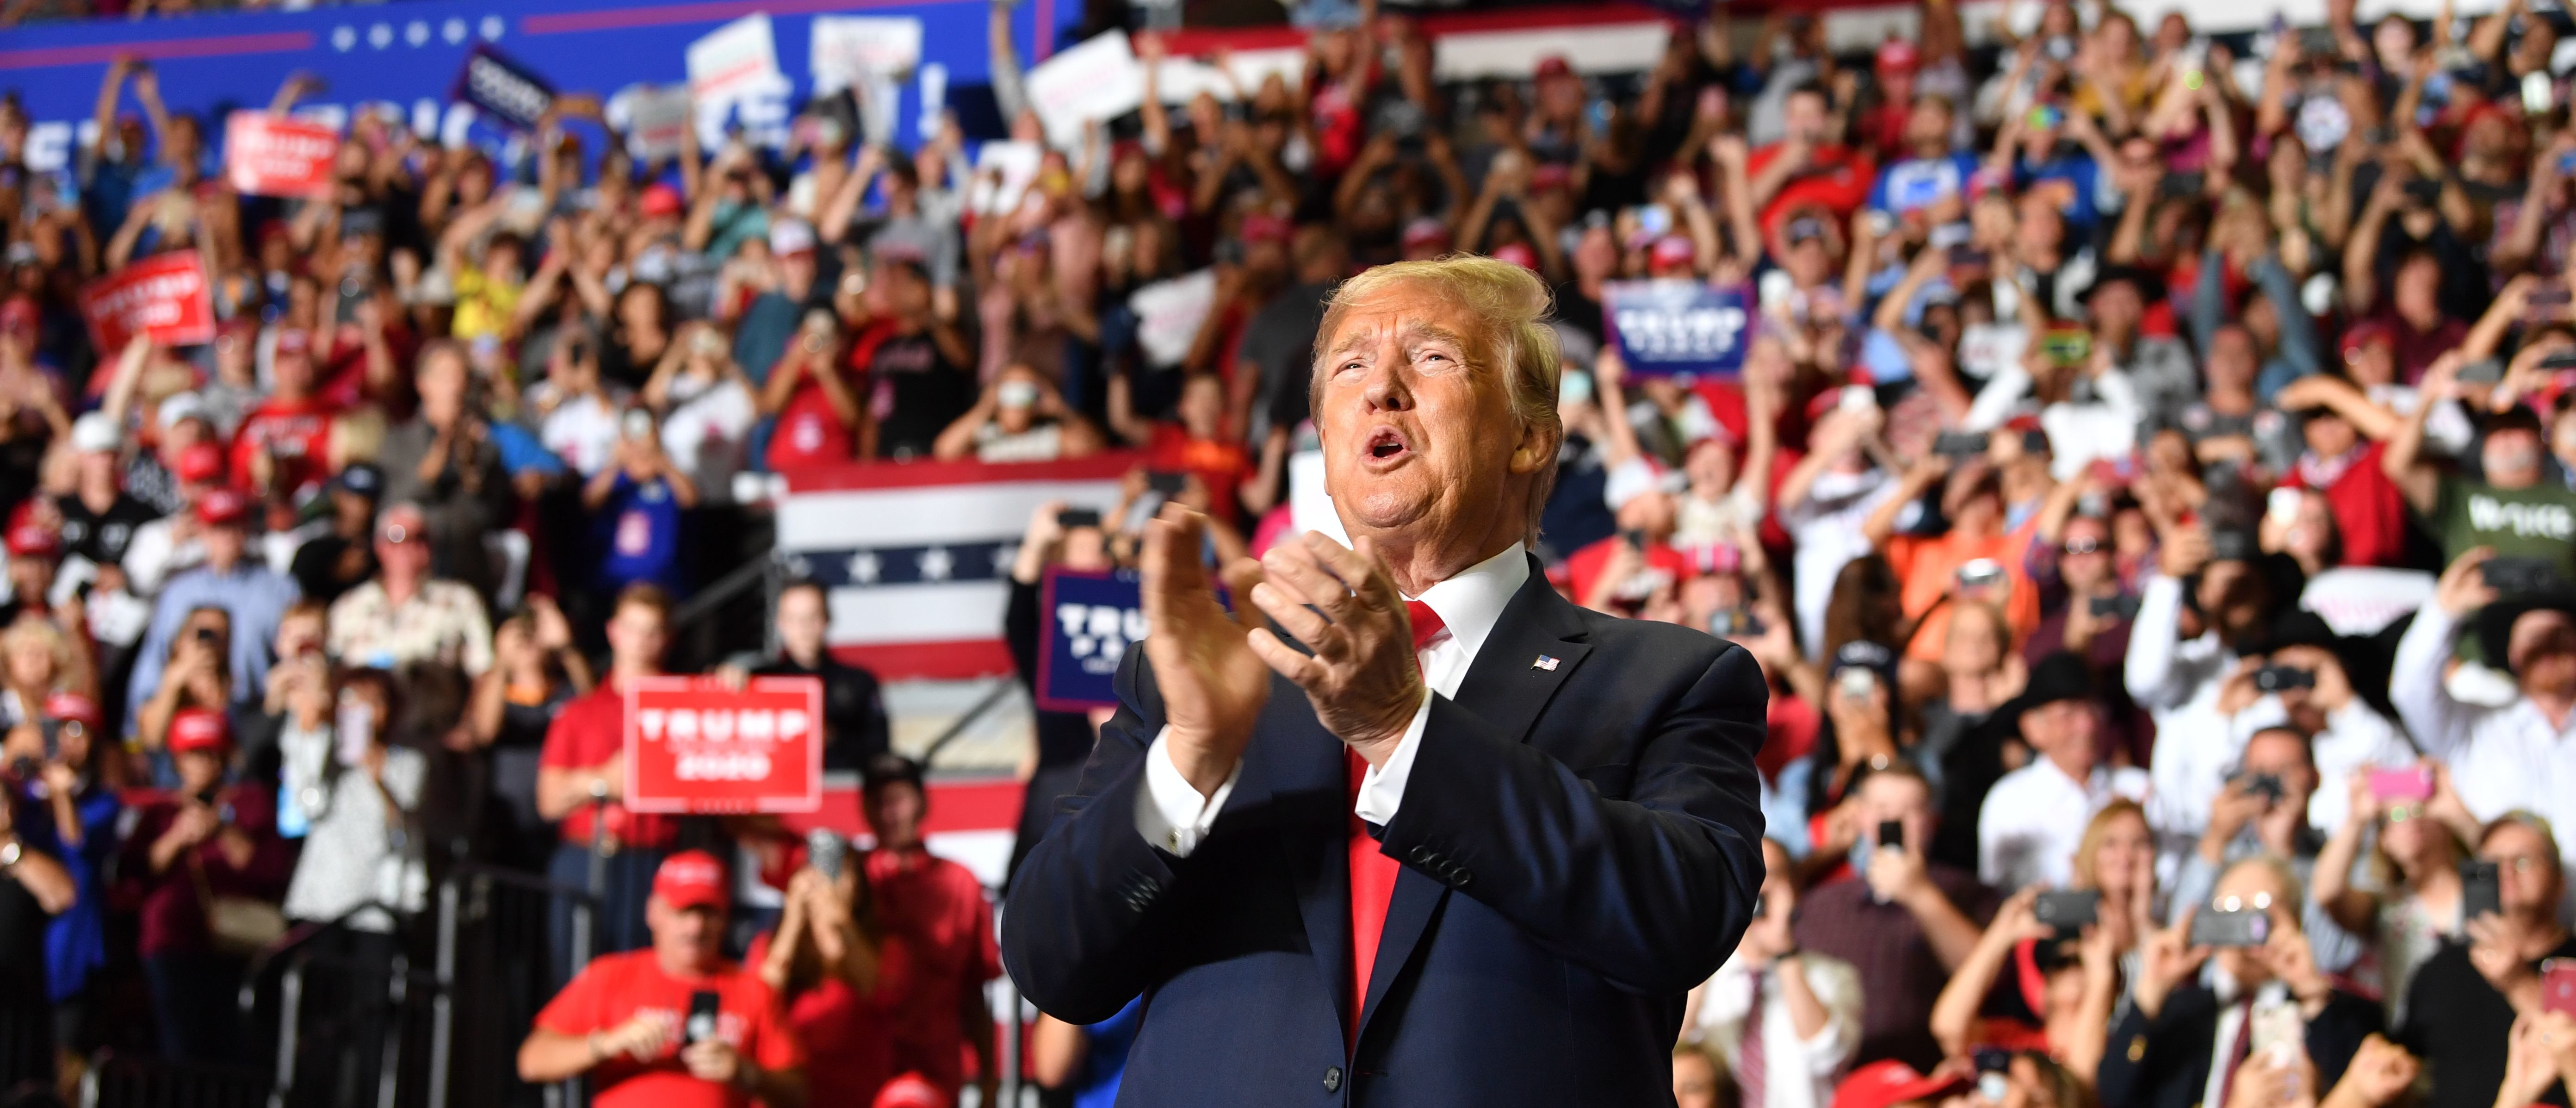 President Donald Trump during a campaign rally in Rio Rancho, New Mexico, on September 16, 2019. (Nicholas Kamm/AFP/Getty Images)